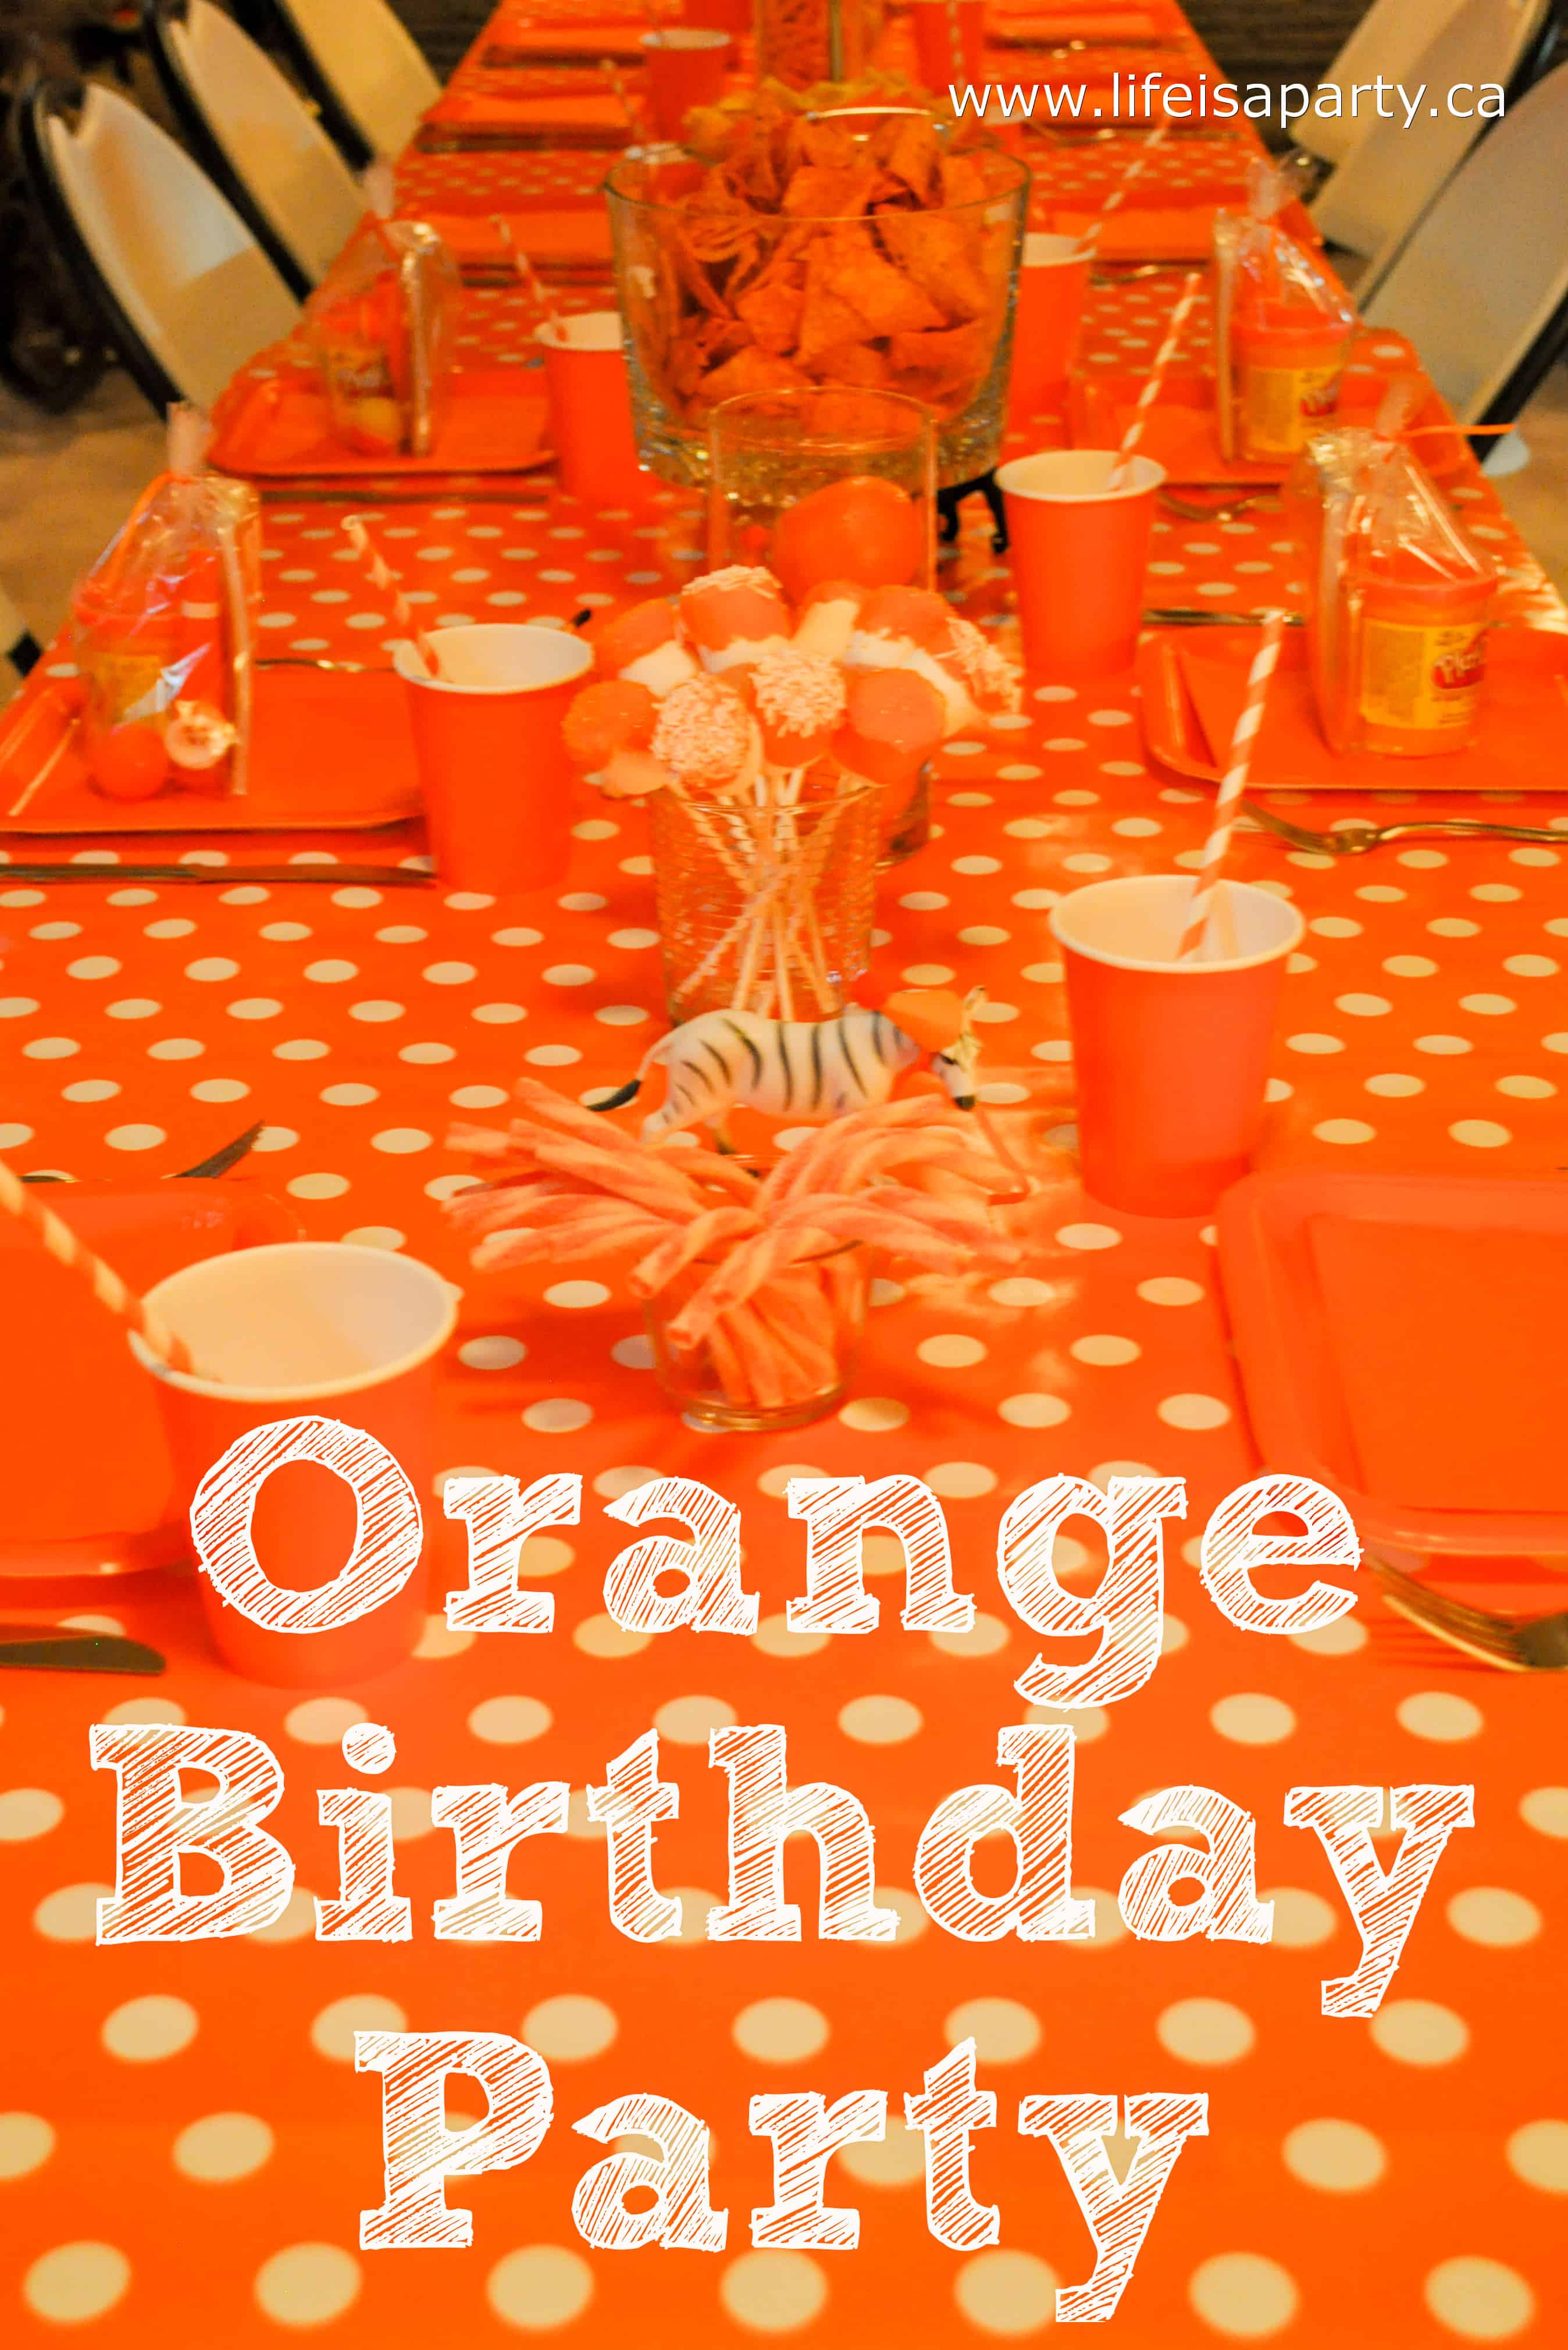 Orange Birthday Party: simple ideas for orange decor, table setting, food ides, and loot bags for a fun oranged themed birthay party.